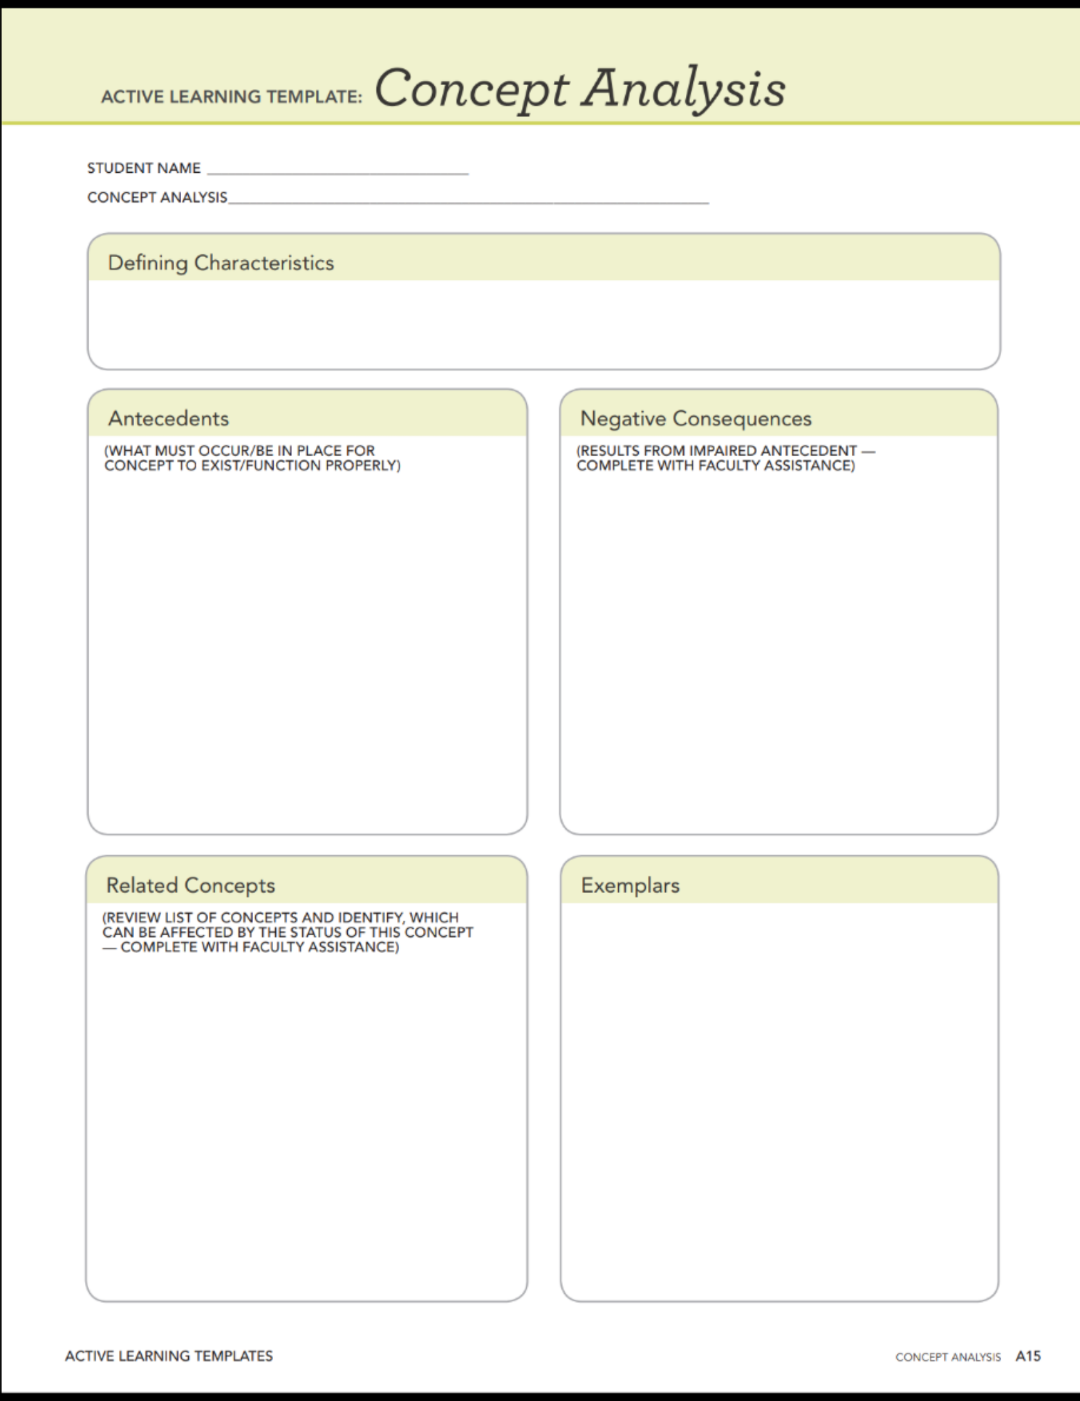 Active Learning Template Concept Analysis